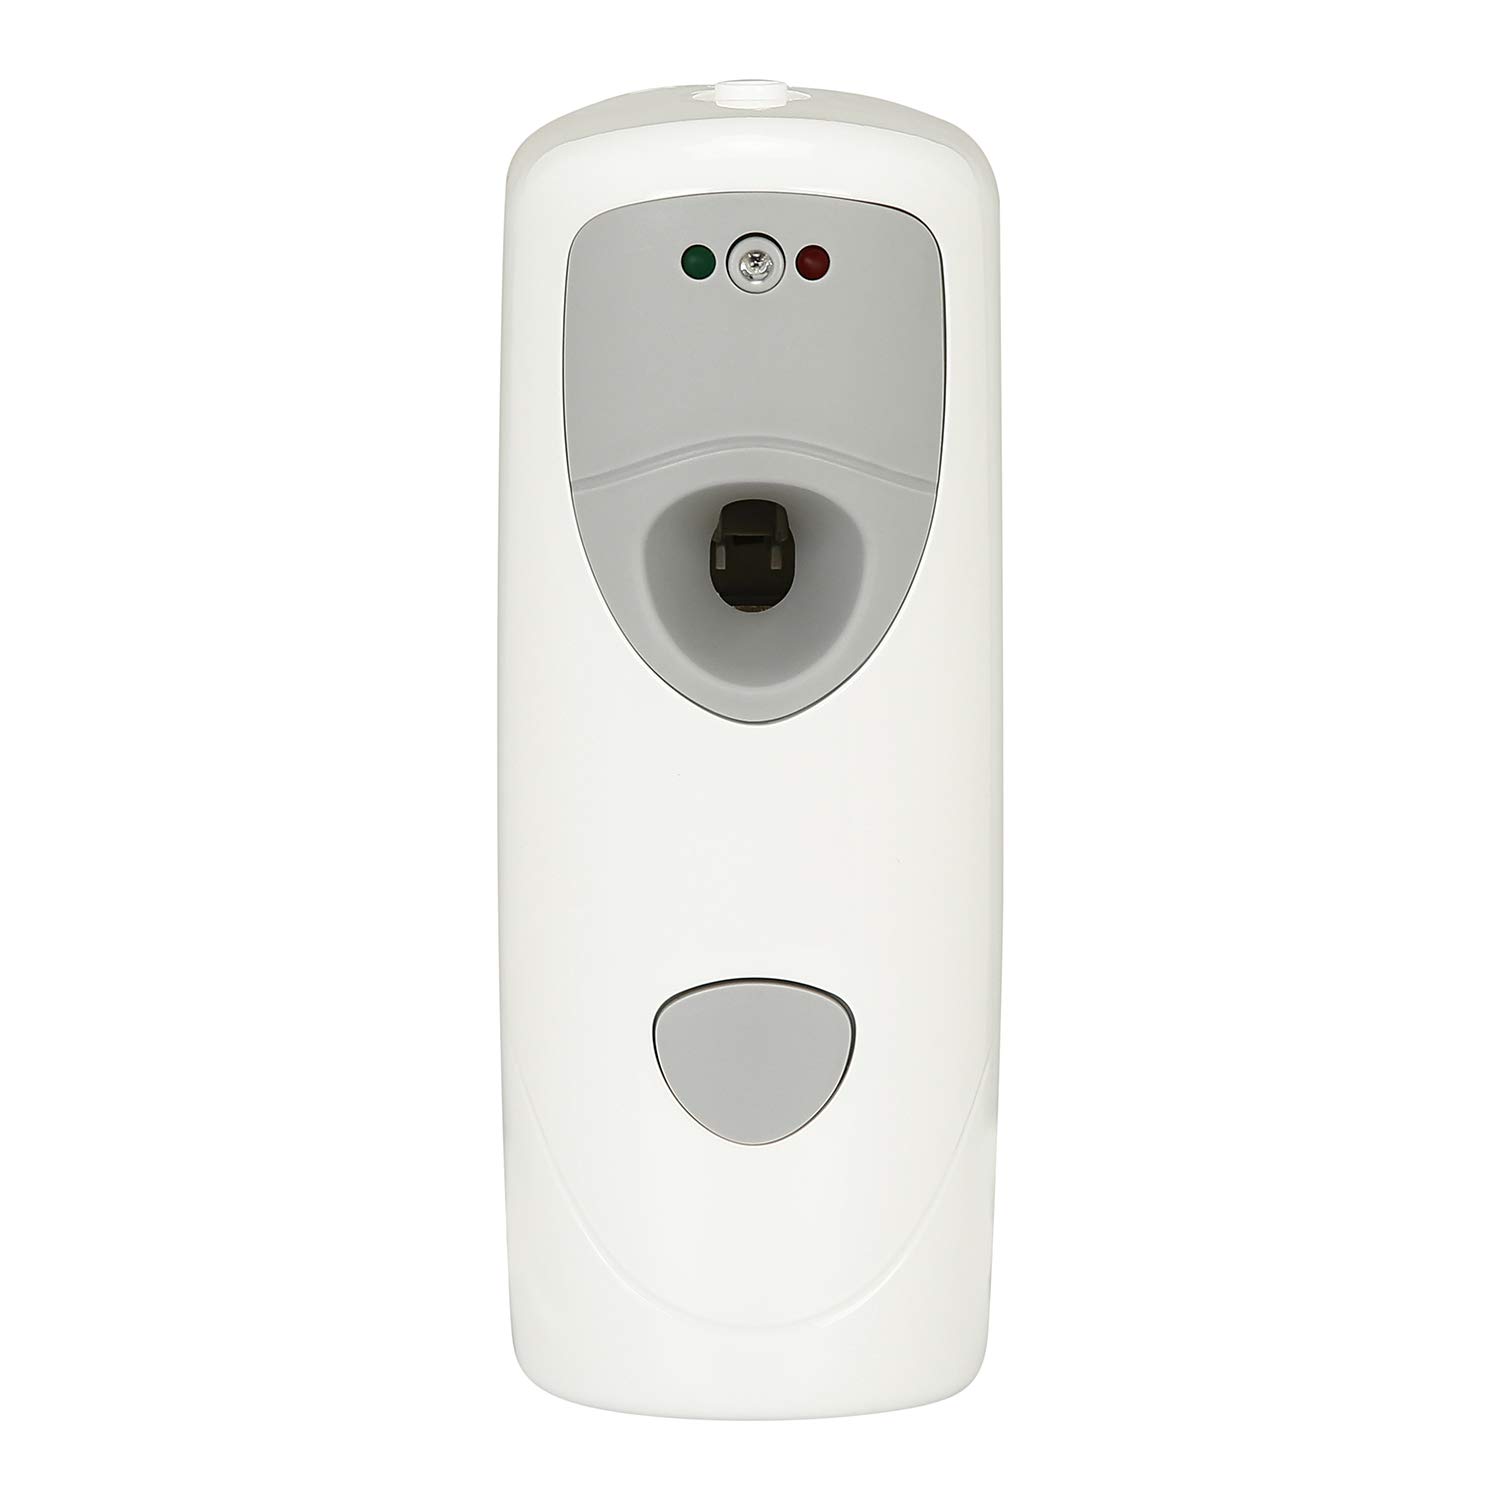 I am looking for Discover Air Freshener Dispenser